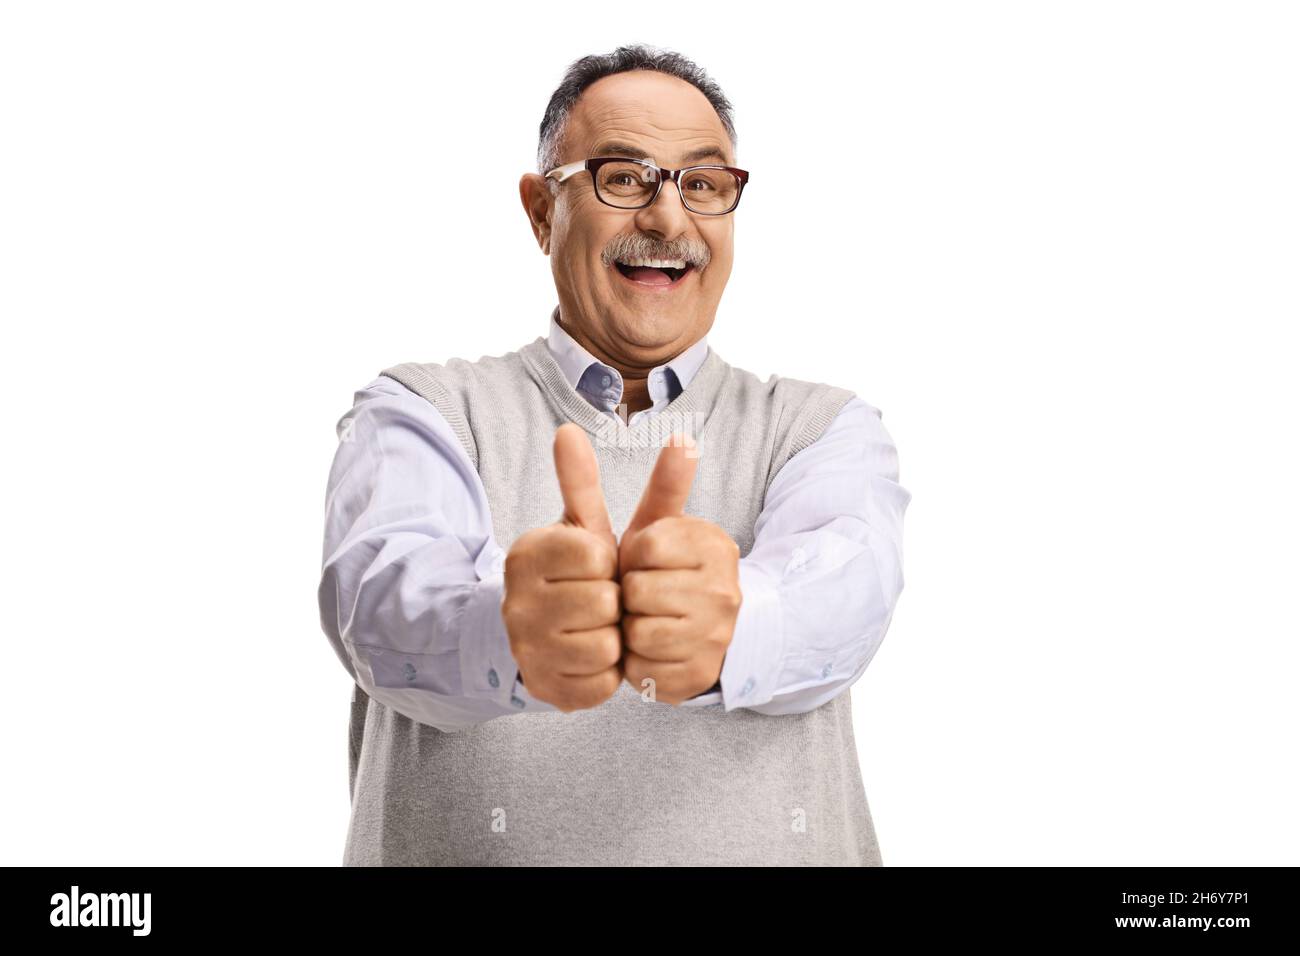 Excited mature man showing both thumbs up isolated on white background Stock Photo